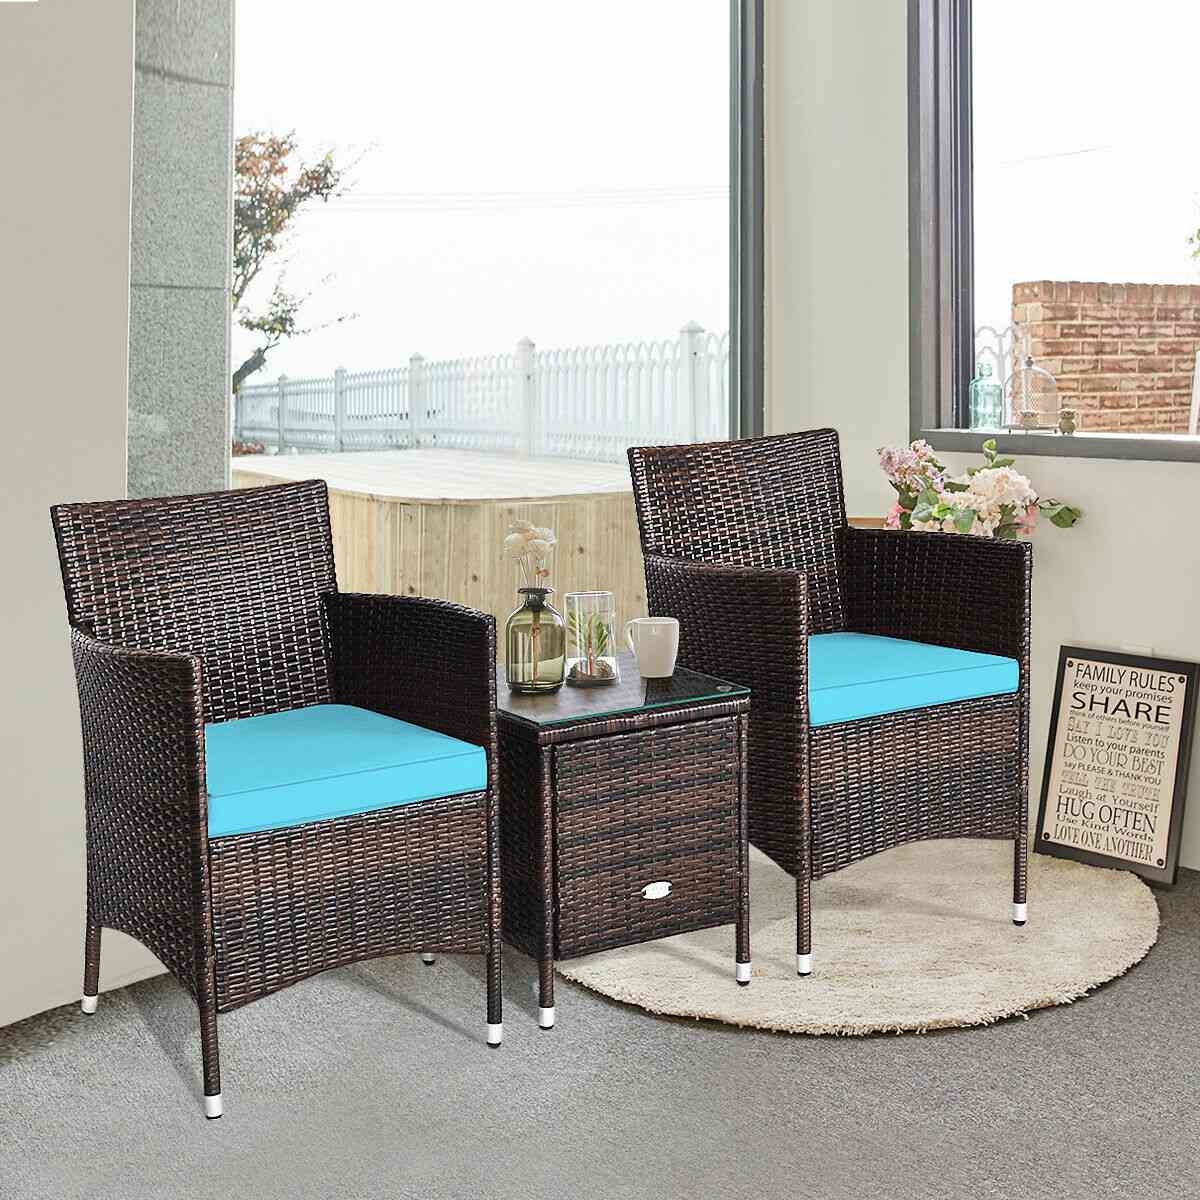 Rattan Wicker Furniture Sets Chairs & Coffee Table